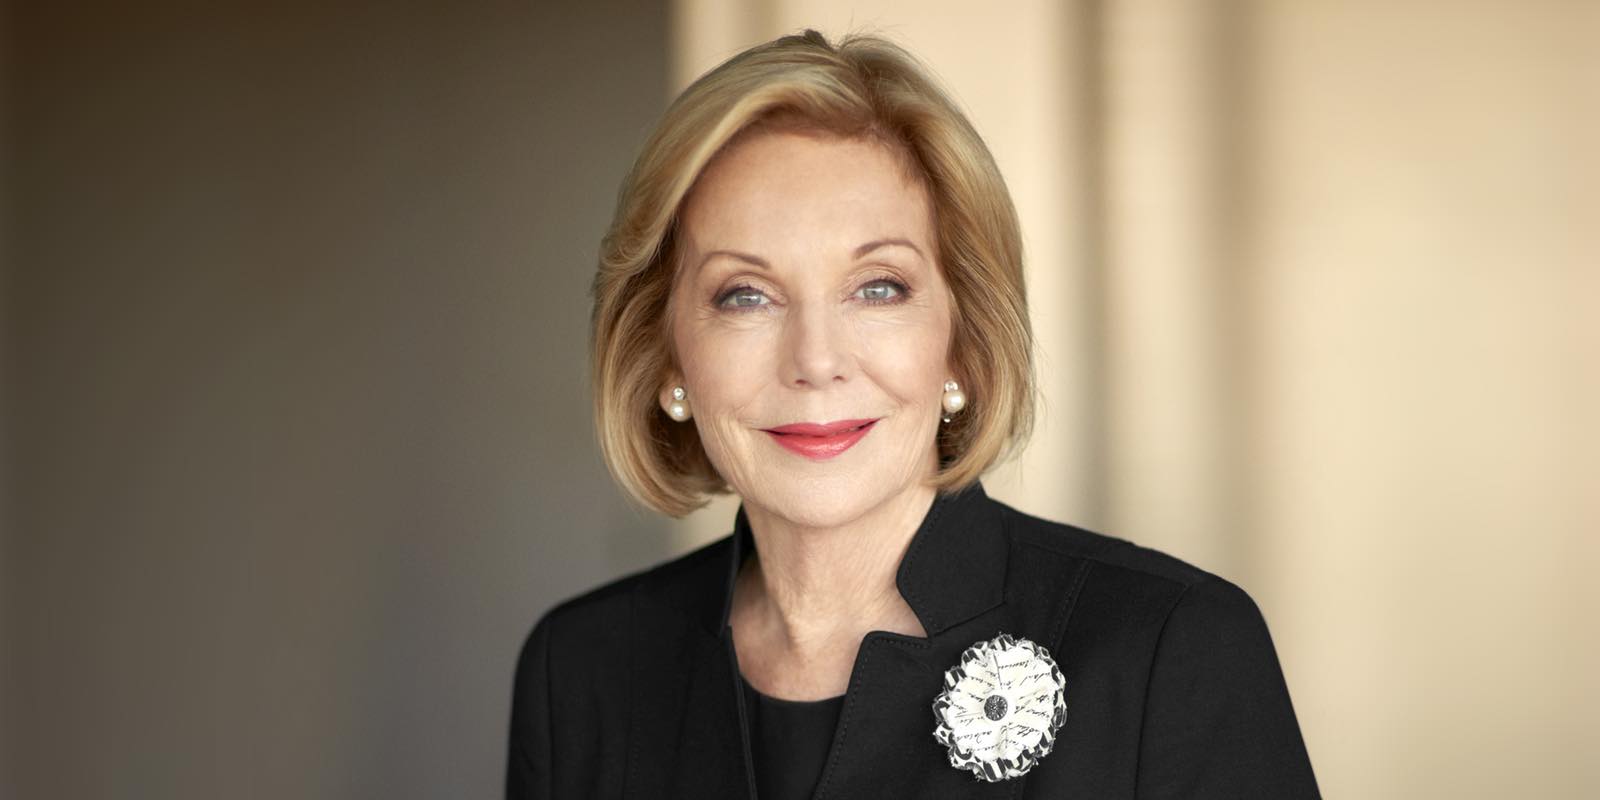 A discussion with Ita Buttrose: Planning to Grow Older Well.